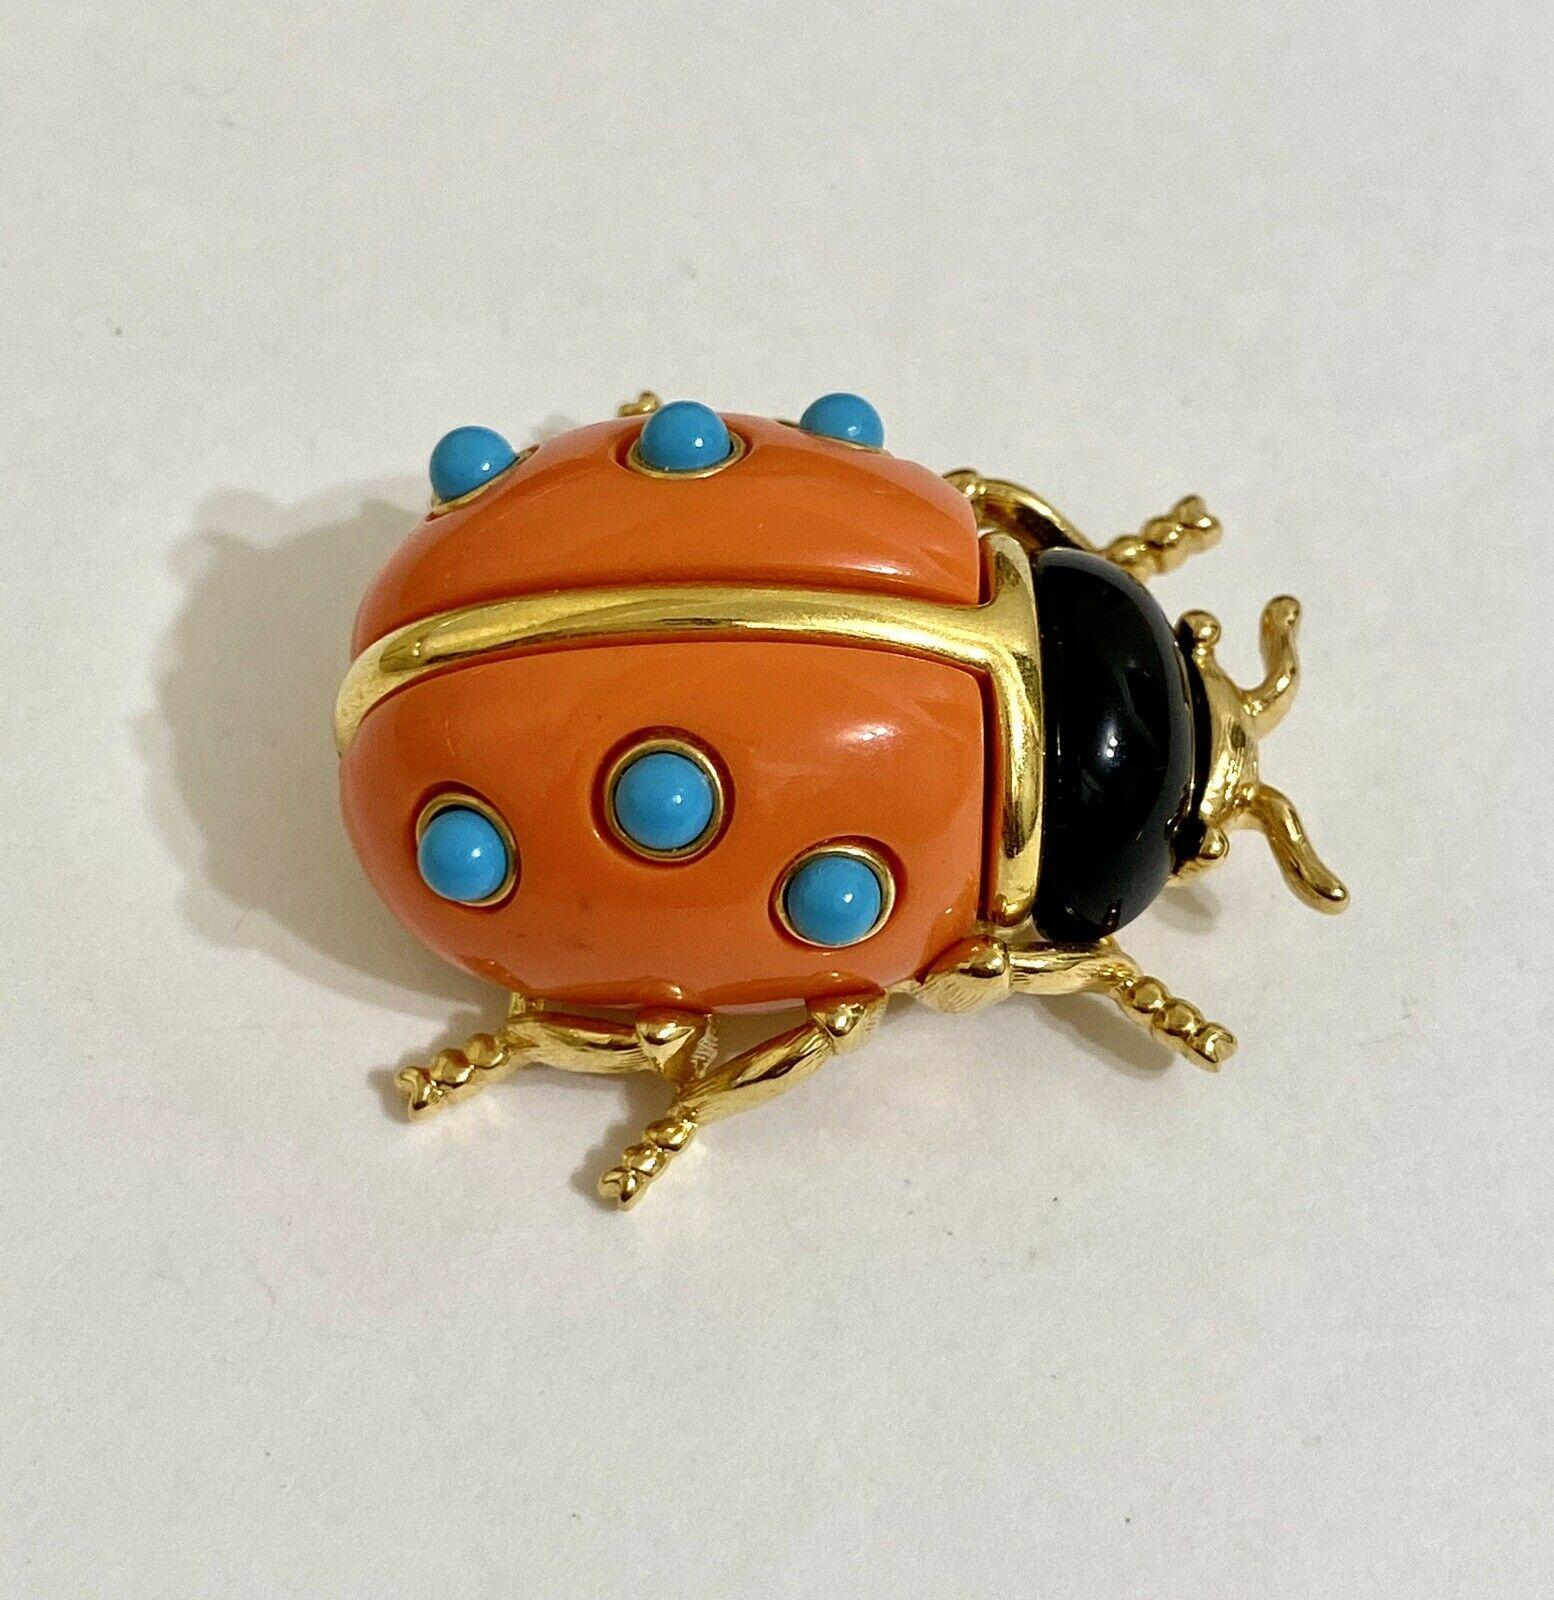 Delightful Ladybug brooch Faux Coral adorned with Faux Turquoise with The look of Real! by Kenneth Jay Lane. Signed on reverse: KJL; measures approx. 1.50